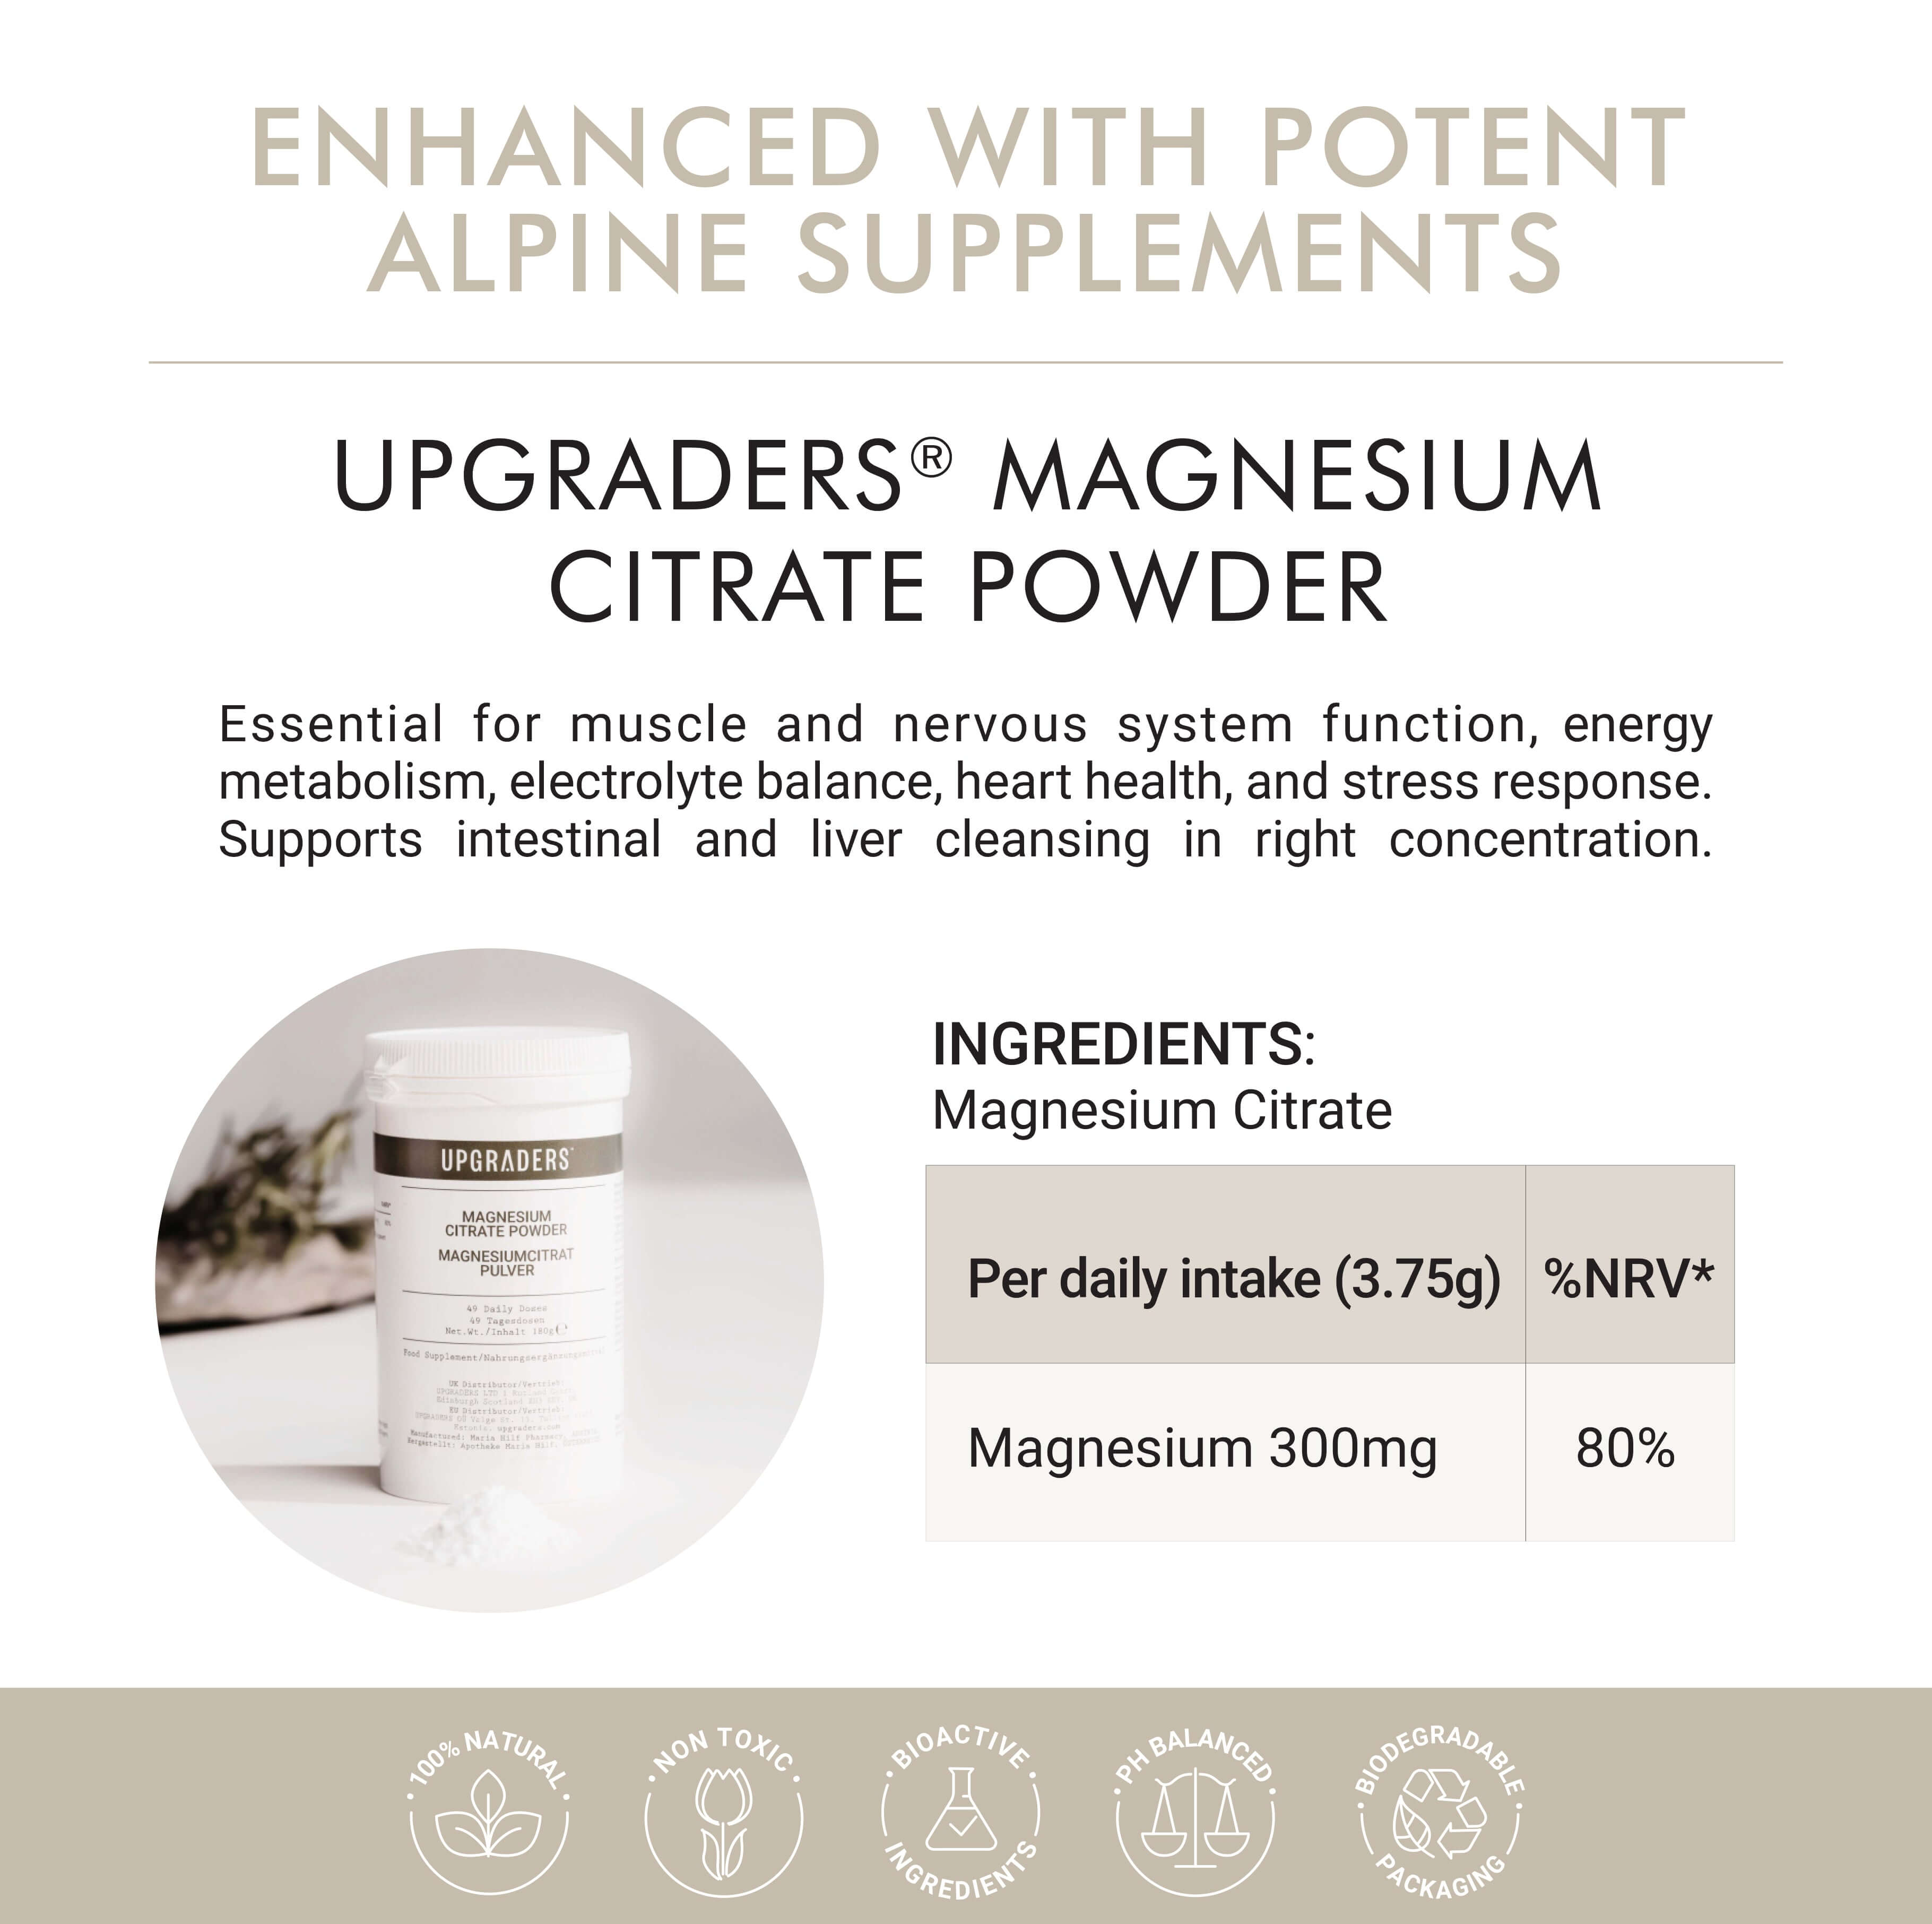  Magnesium Citrate: ingredients and benefits listed